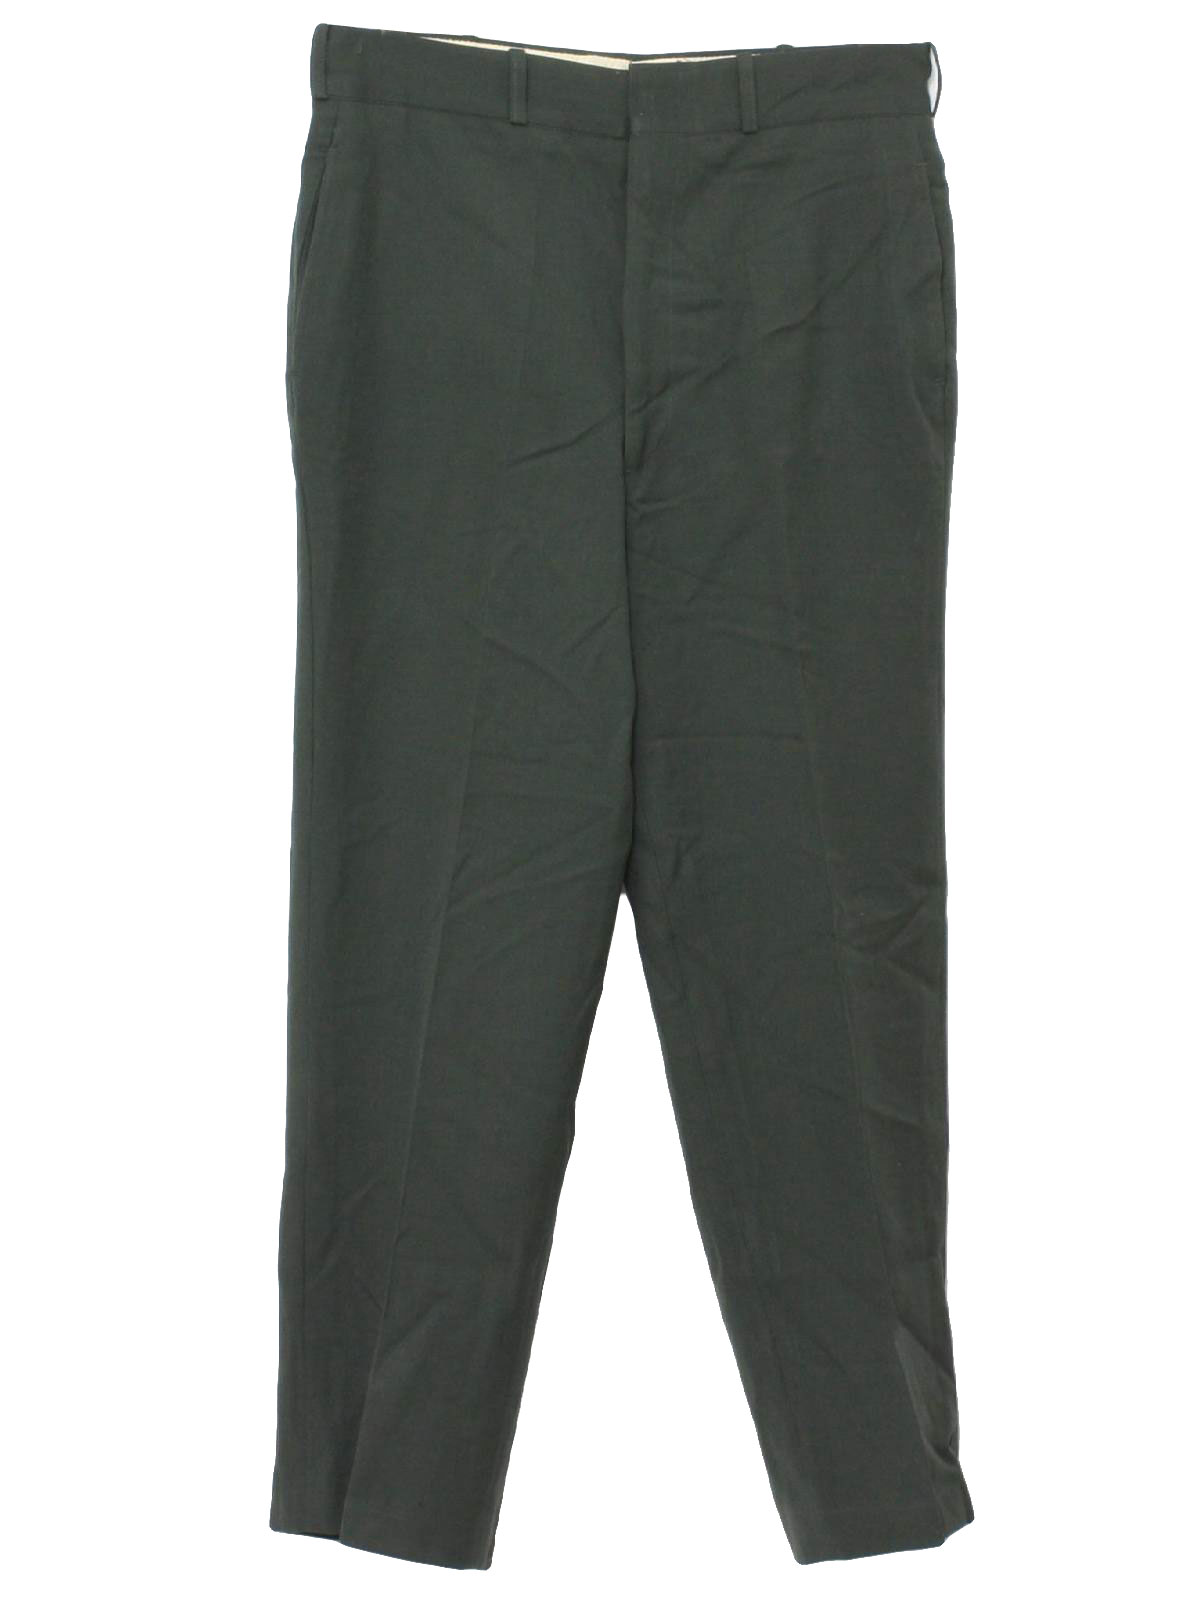 Retro 1960's Pants (Trousers Mans Wool) : 60s -Trousers Mans Wool- Mens ...